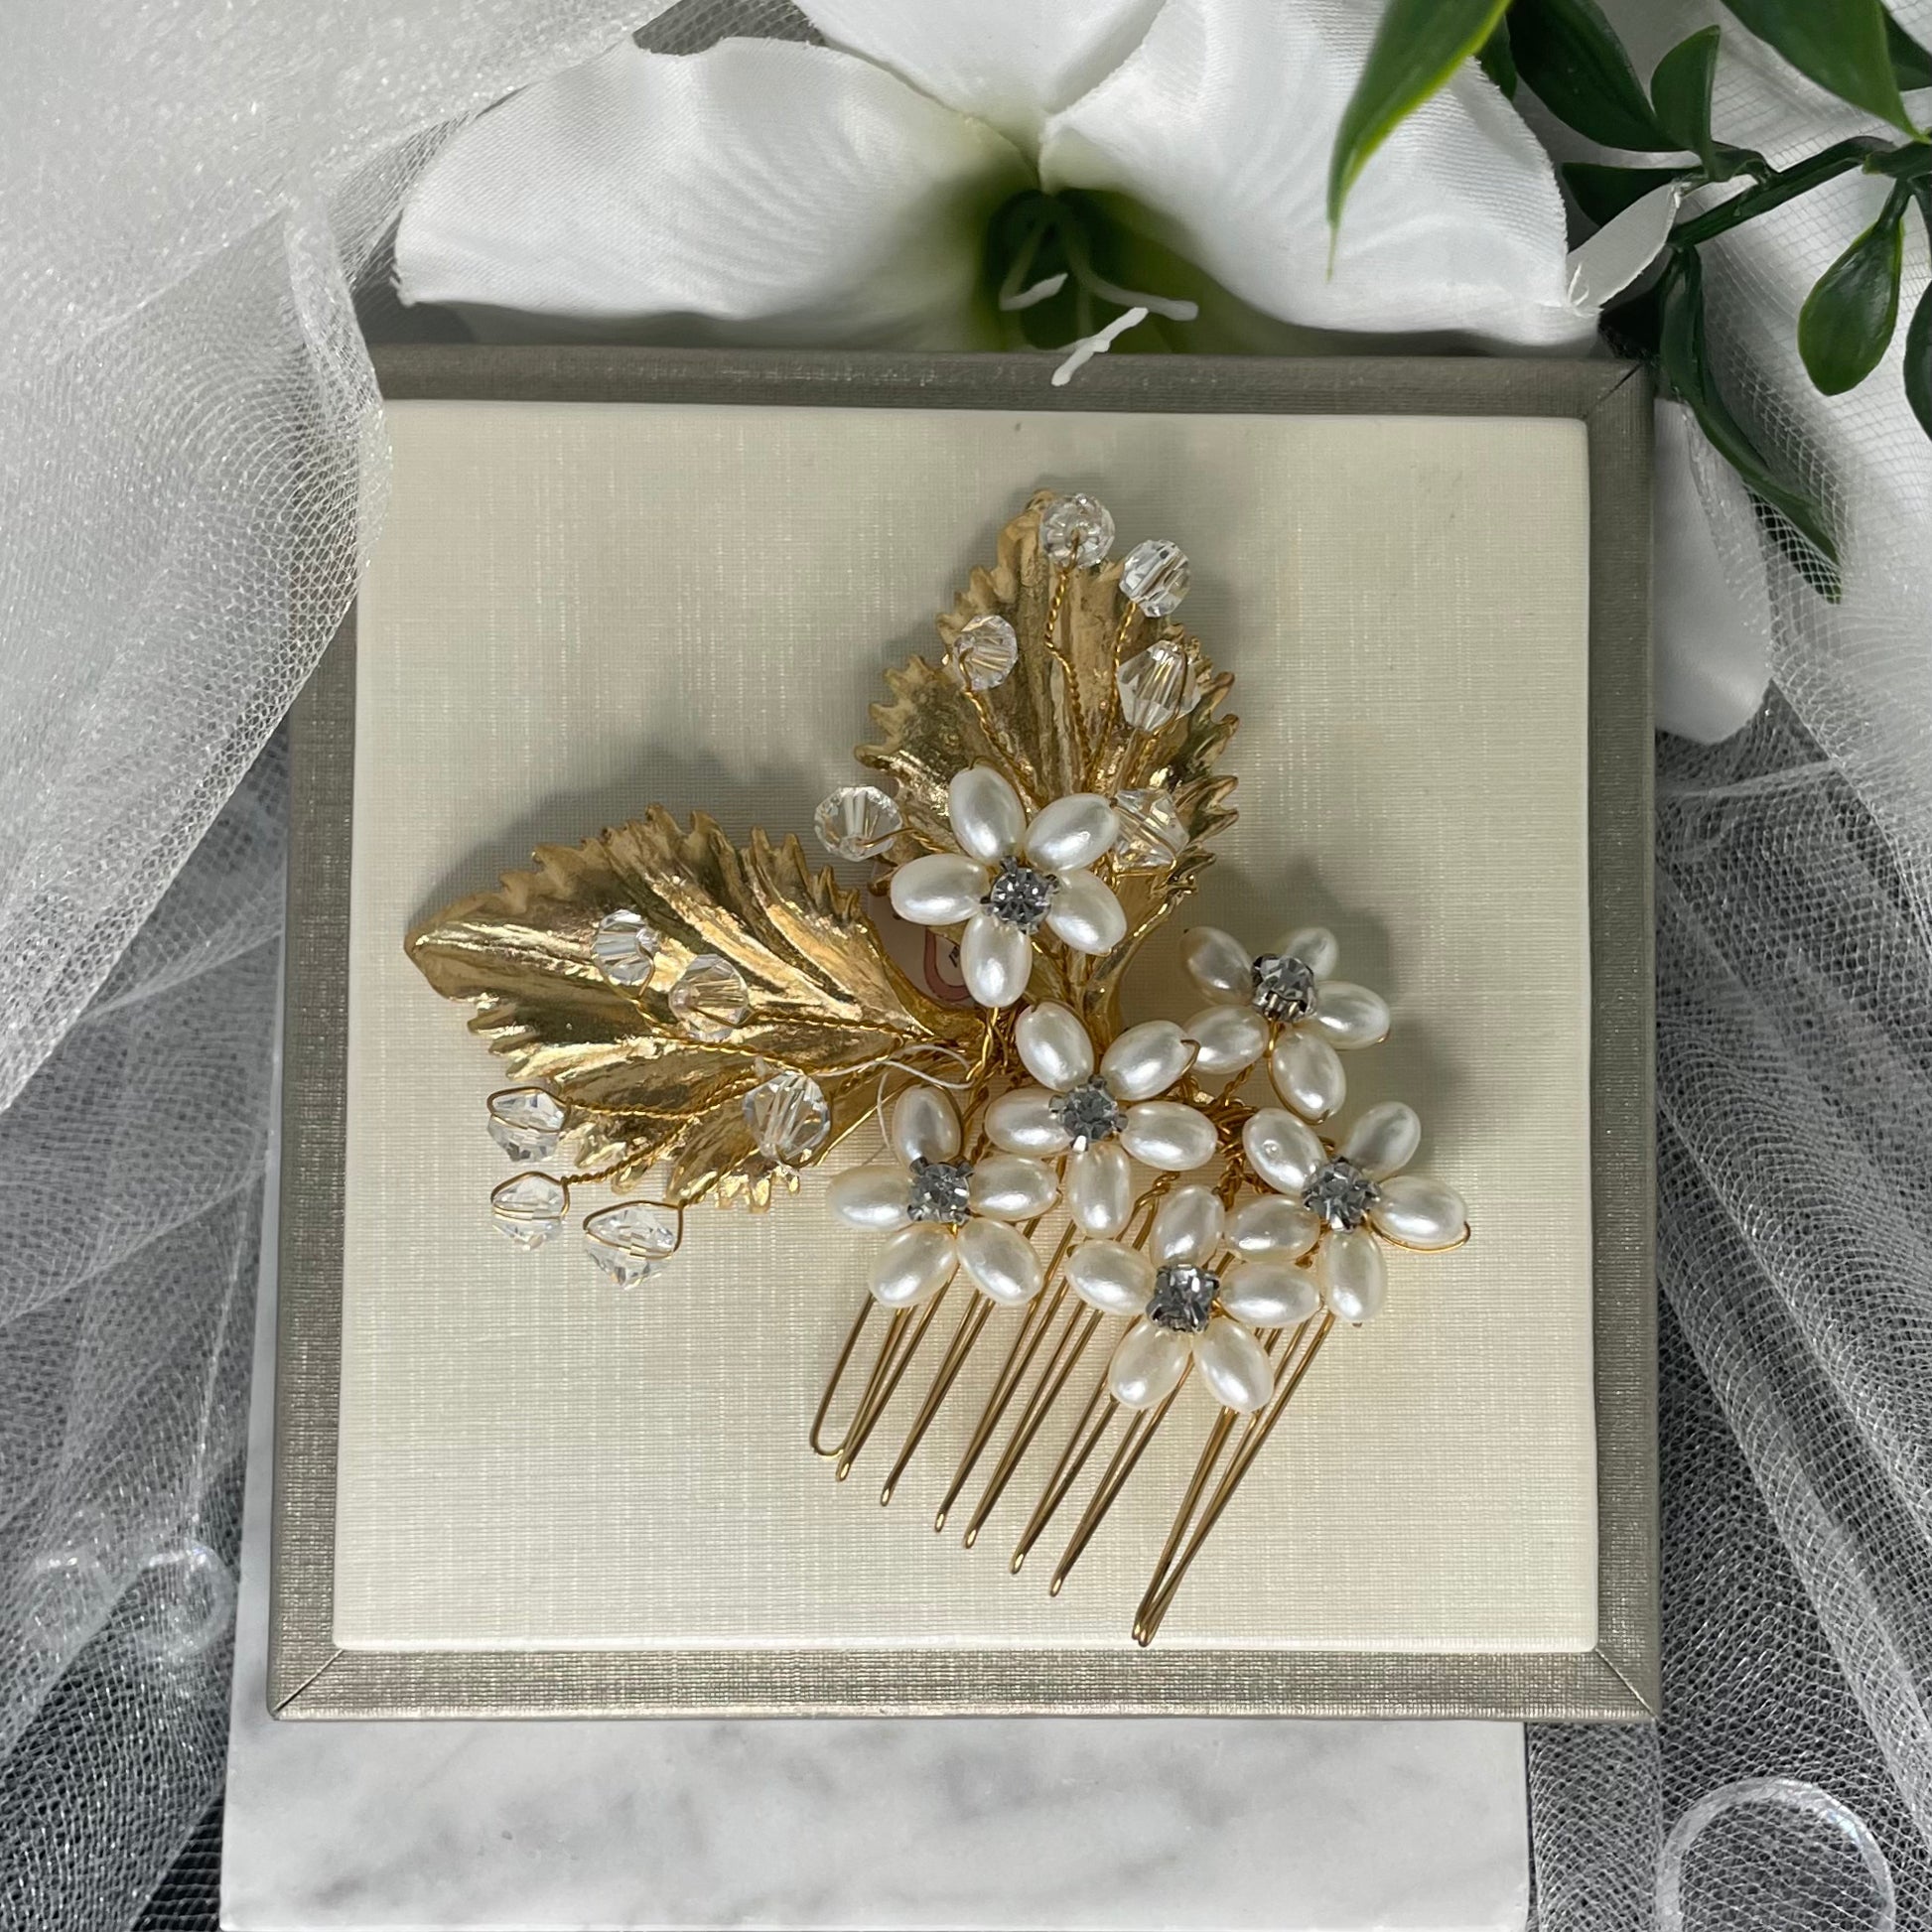 Exquisite Salina Crystal and Pearl Hair Comb featuring pearl flowers with Diamanté centers and gold leaves, perfect for adding a luxurious touch to bridal hairstyles.